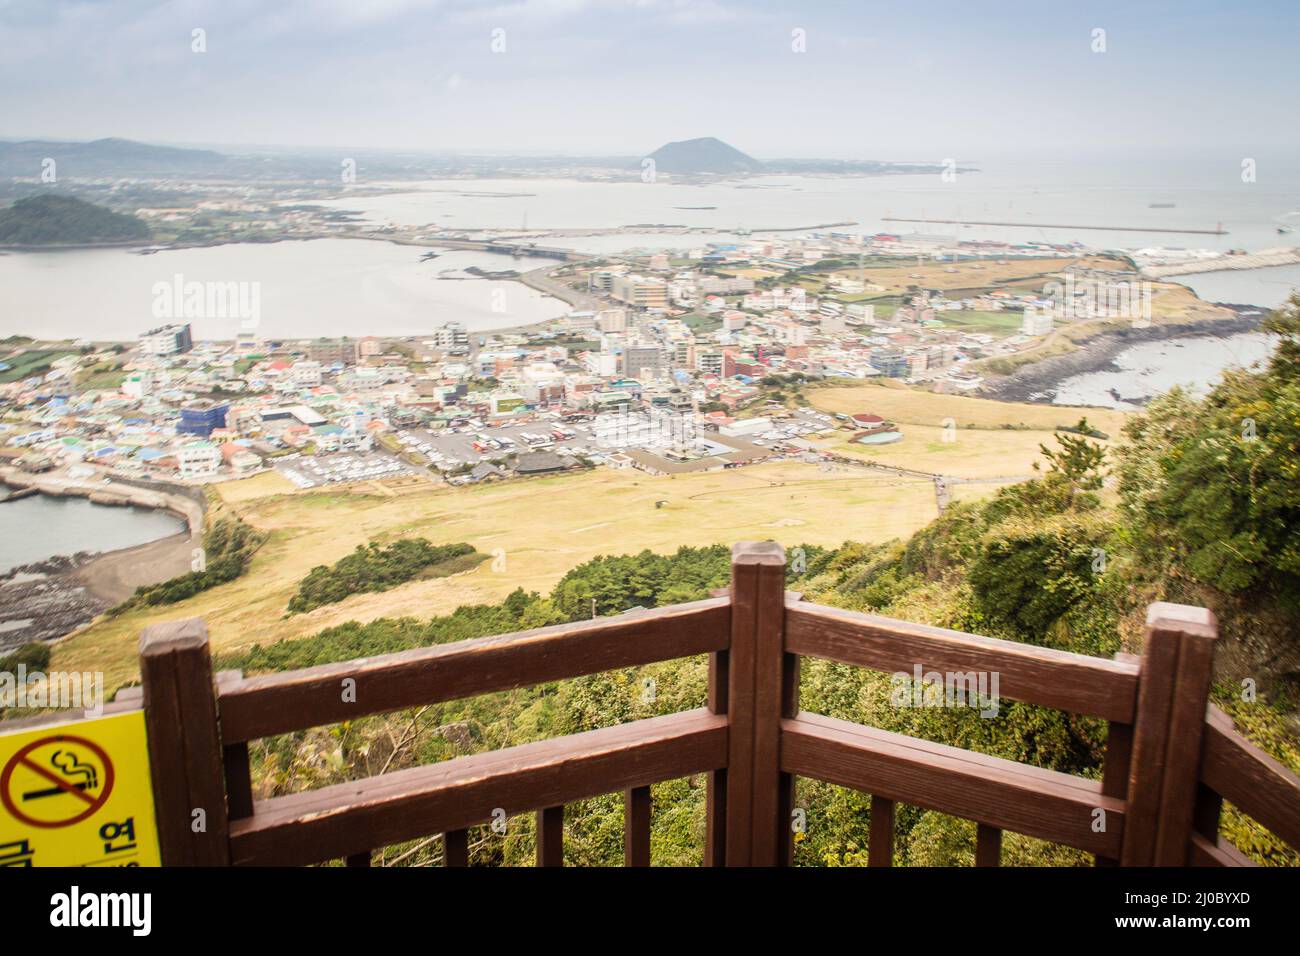 View from Seongsan Ilchulbong (Sunrise Peak), one of the UNESCO nature tourism site on Jeju Island in South Korea Stock Photo